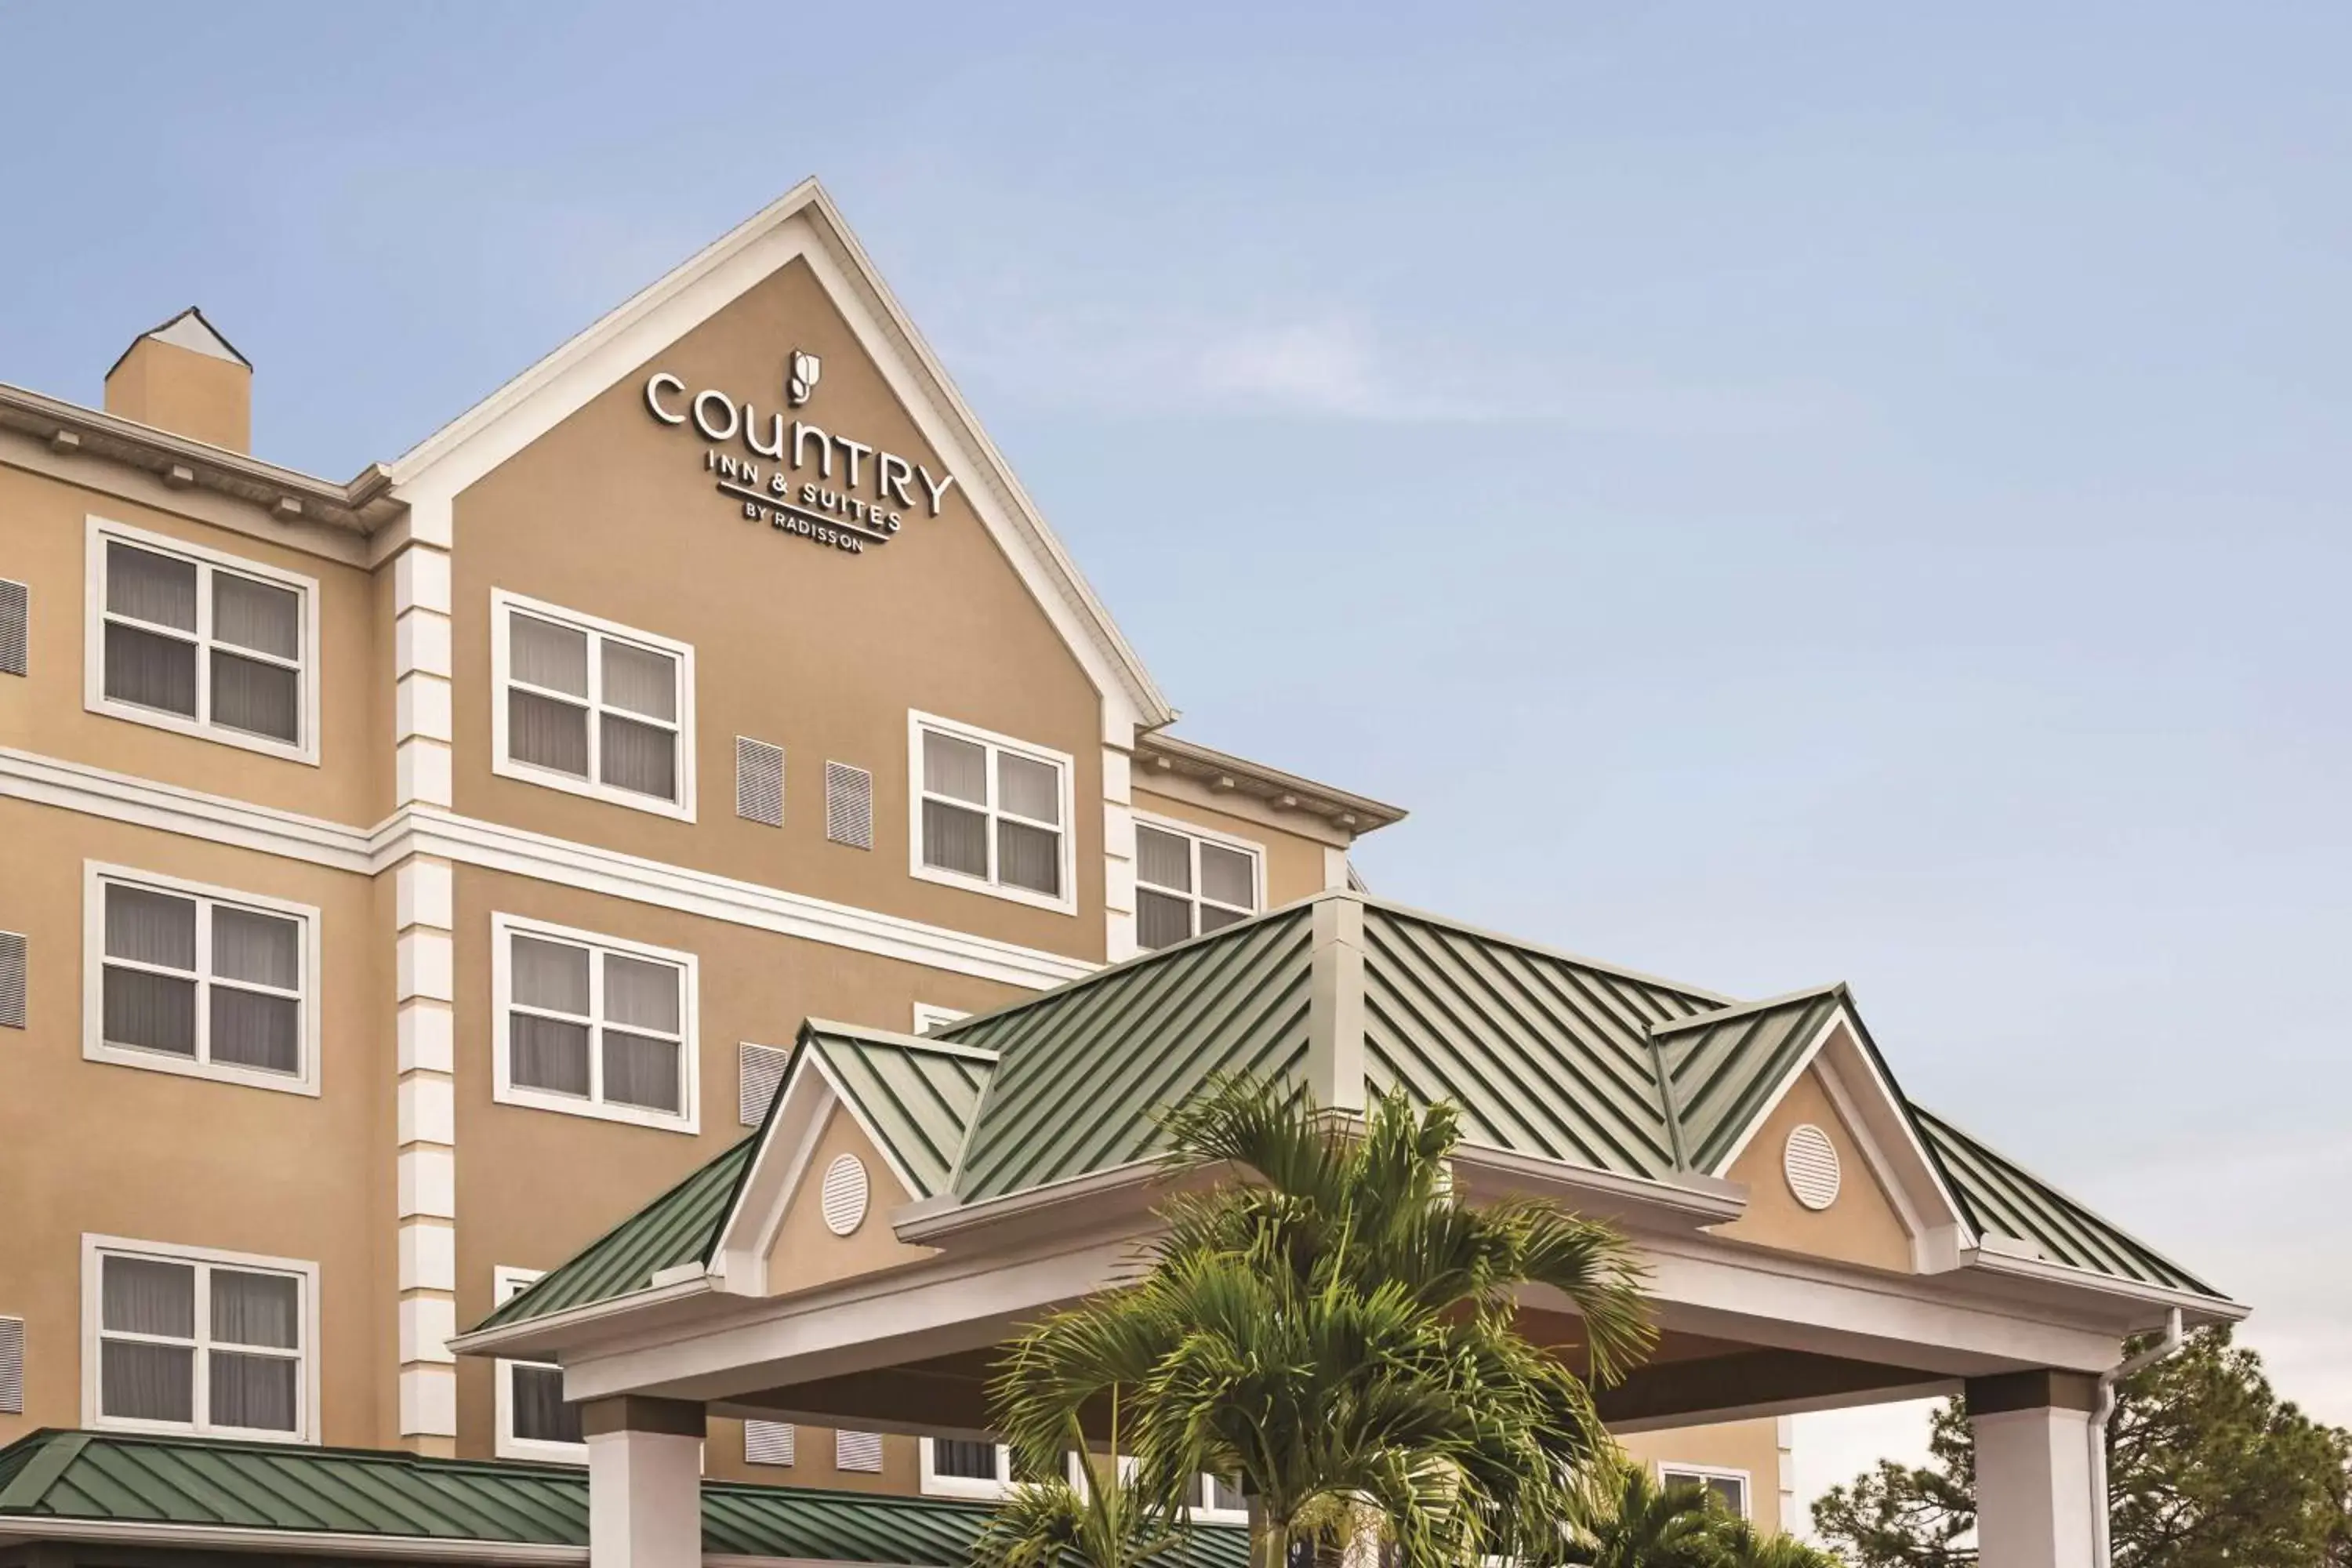 Property Building in Country Inn & Suites by Radisson, Tampa Airport North, FL